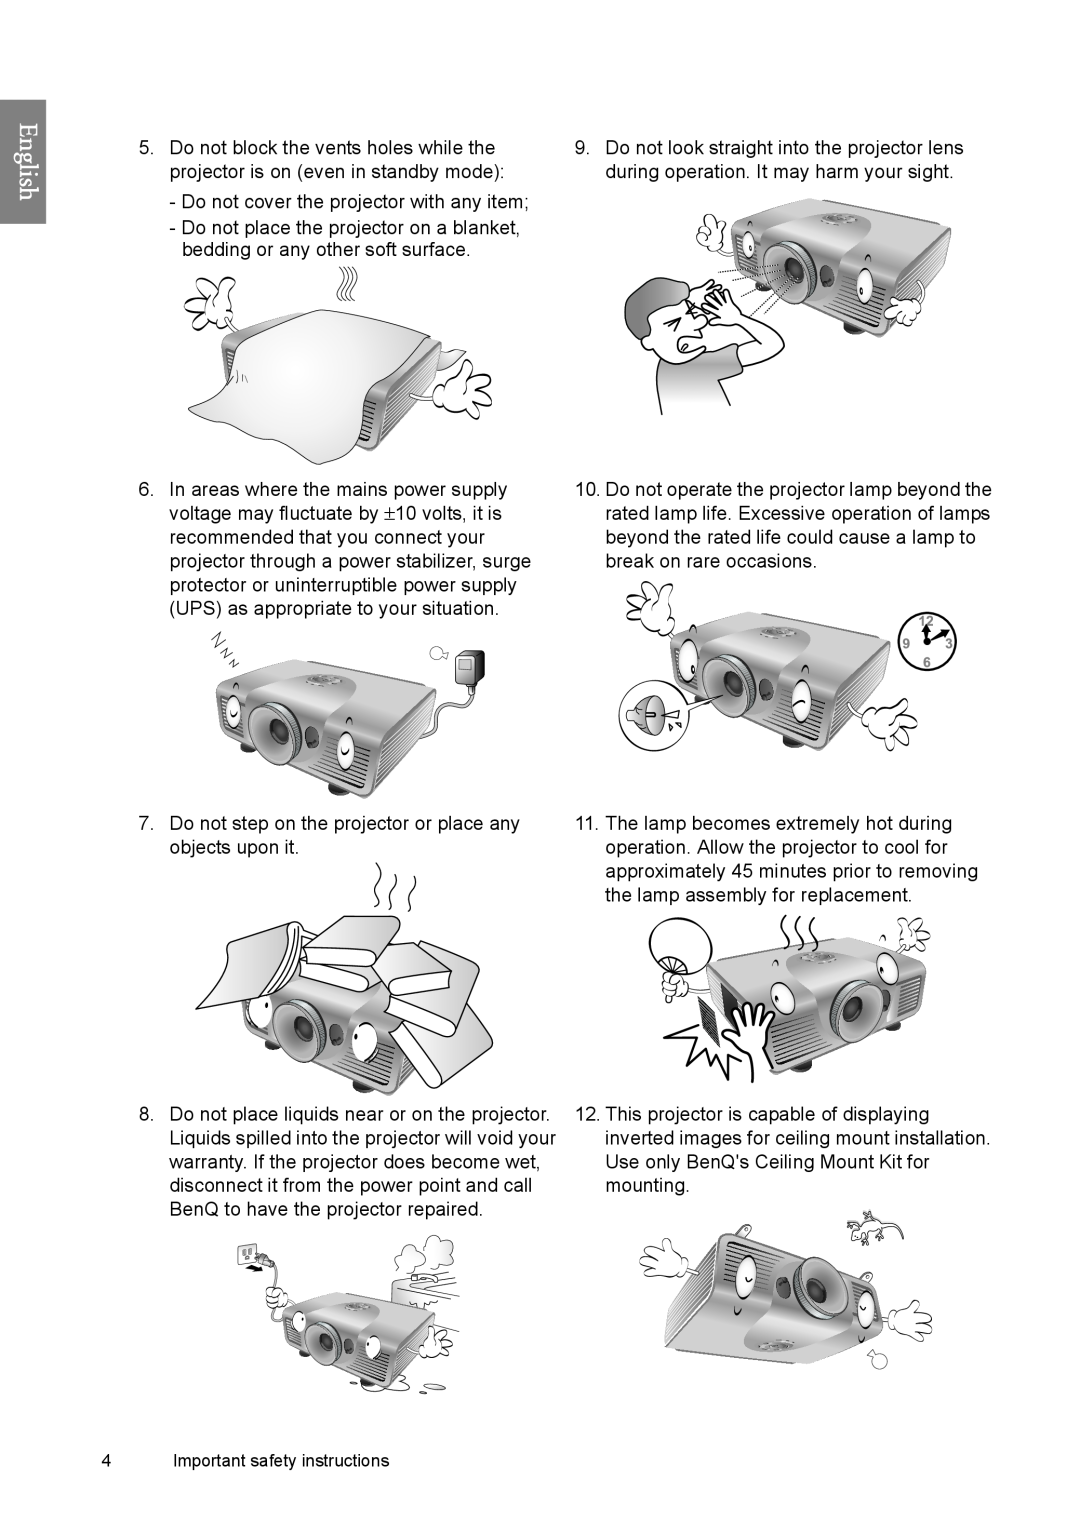 BenQ W6500 user manual English, Do not cover the projector with any item 